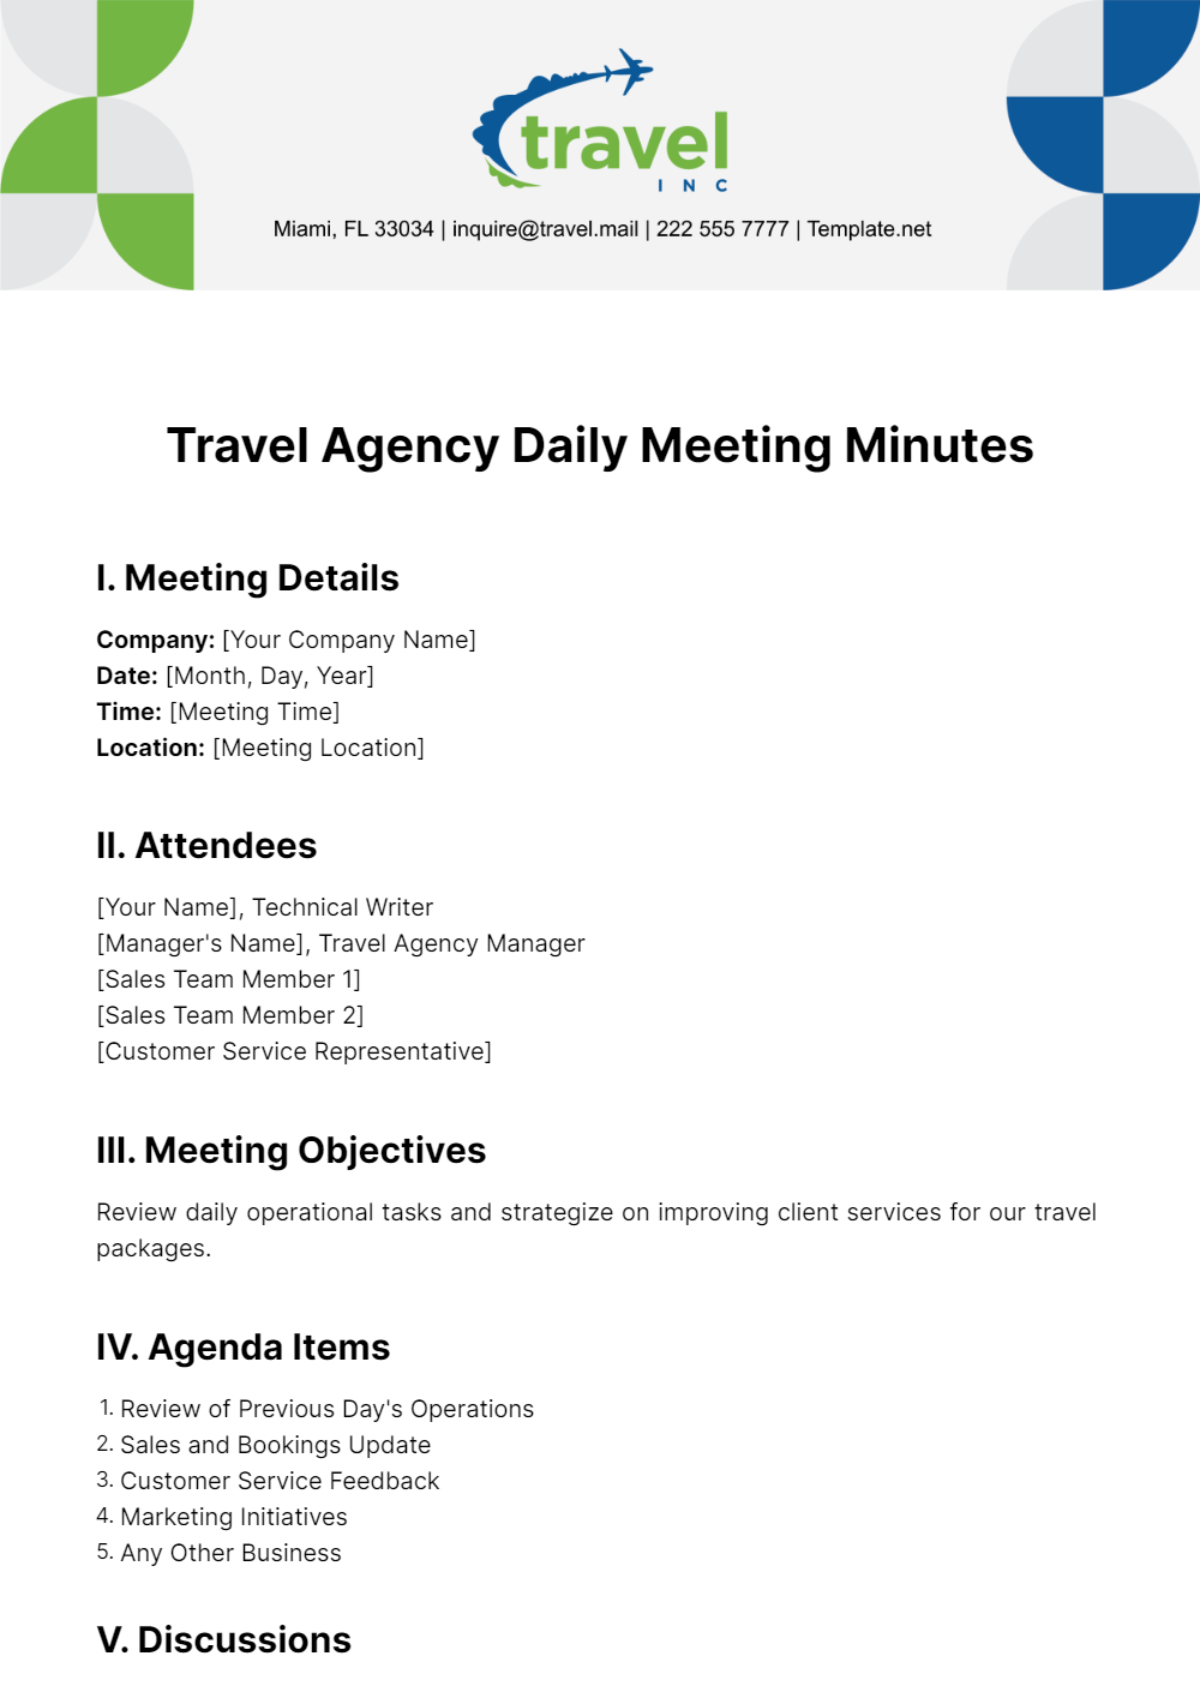 Travel Agency Daily Meeting Minutes Template